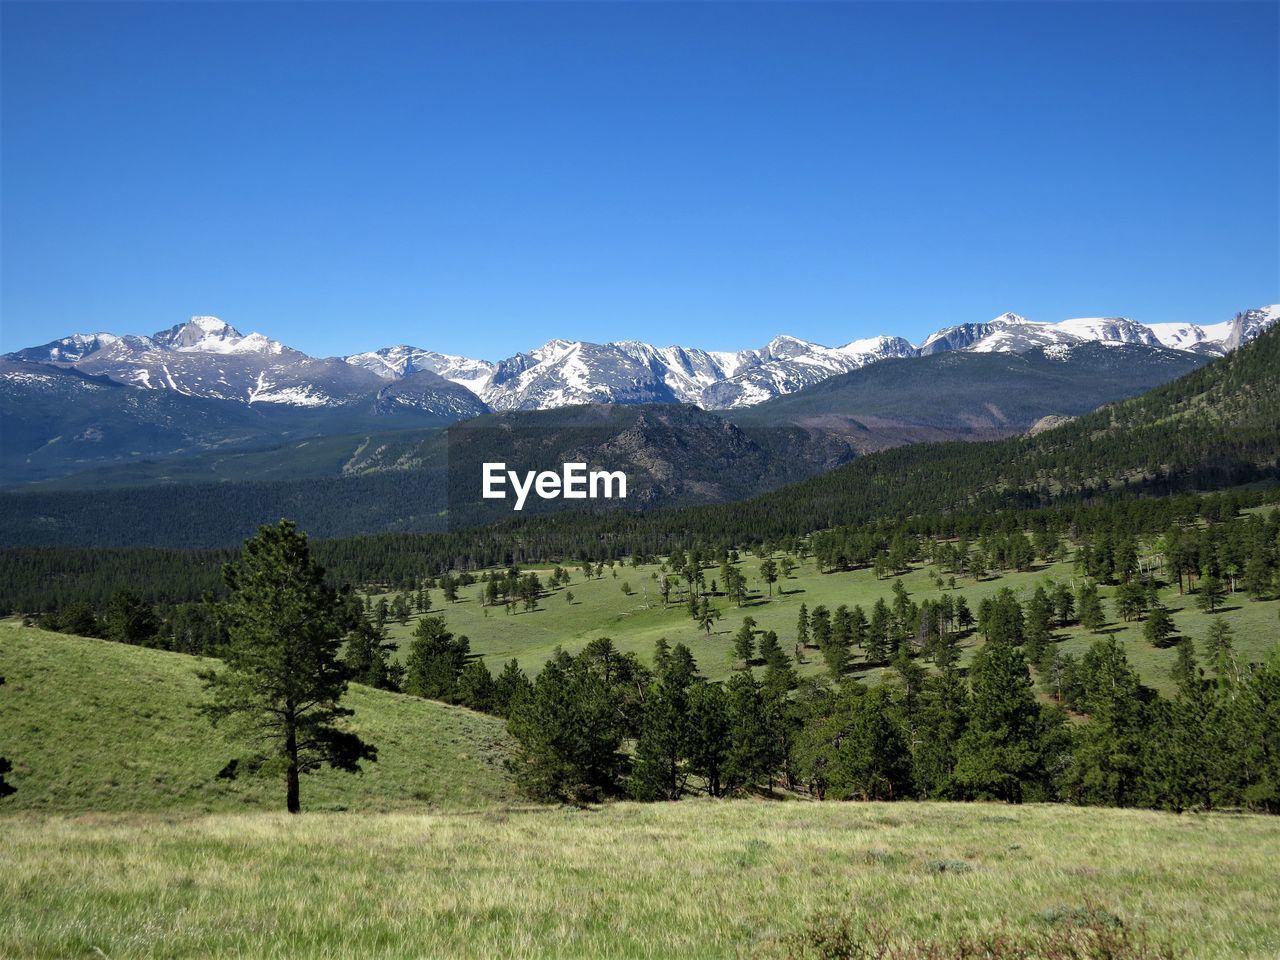 SCENIC VIEW OF TREES AND MOUNTAINS AGAINST CLEAR SKY